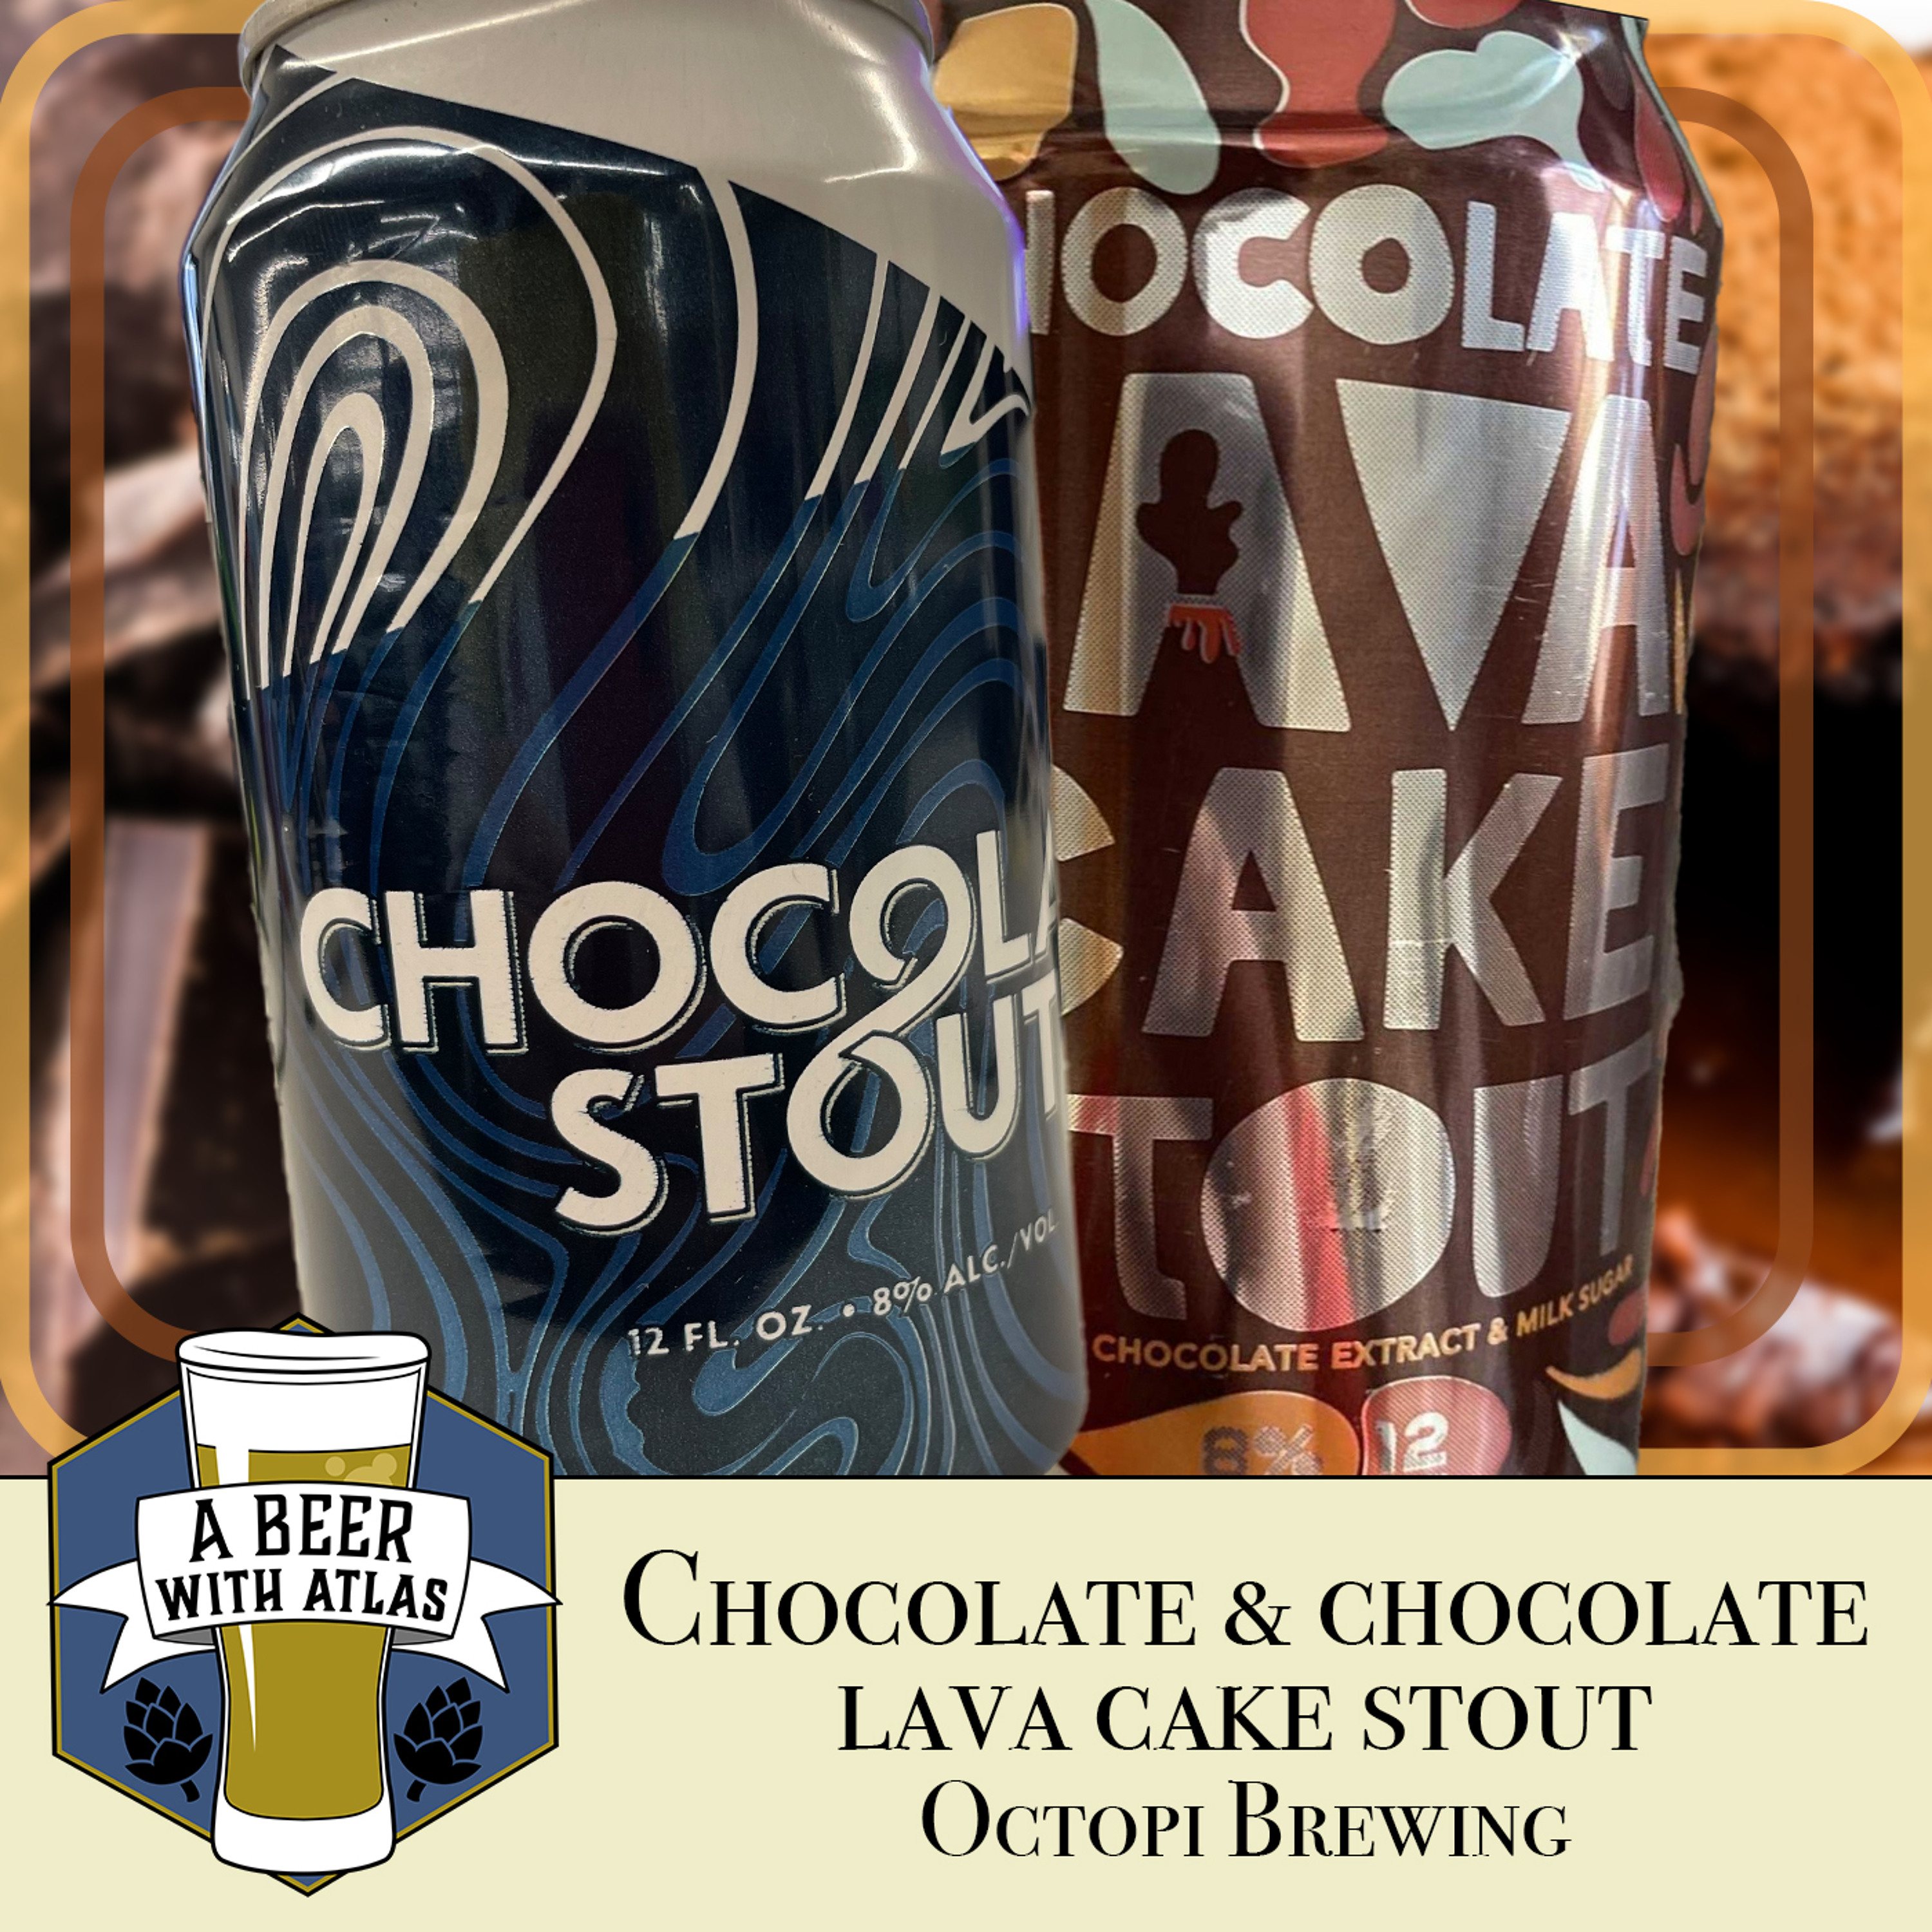 A Chocolate Stout and a side of Chocolate Lava Cake Stout - A Beer with Atlas 181